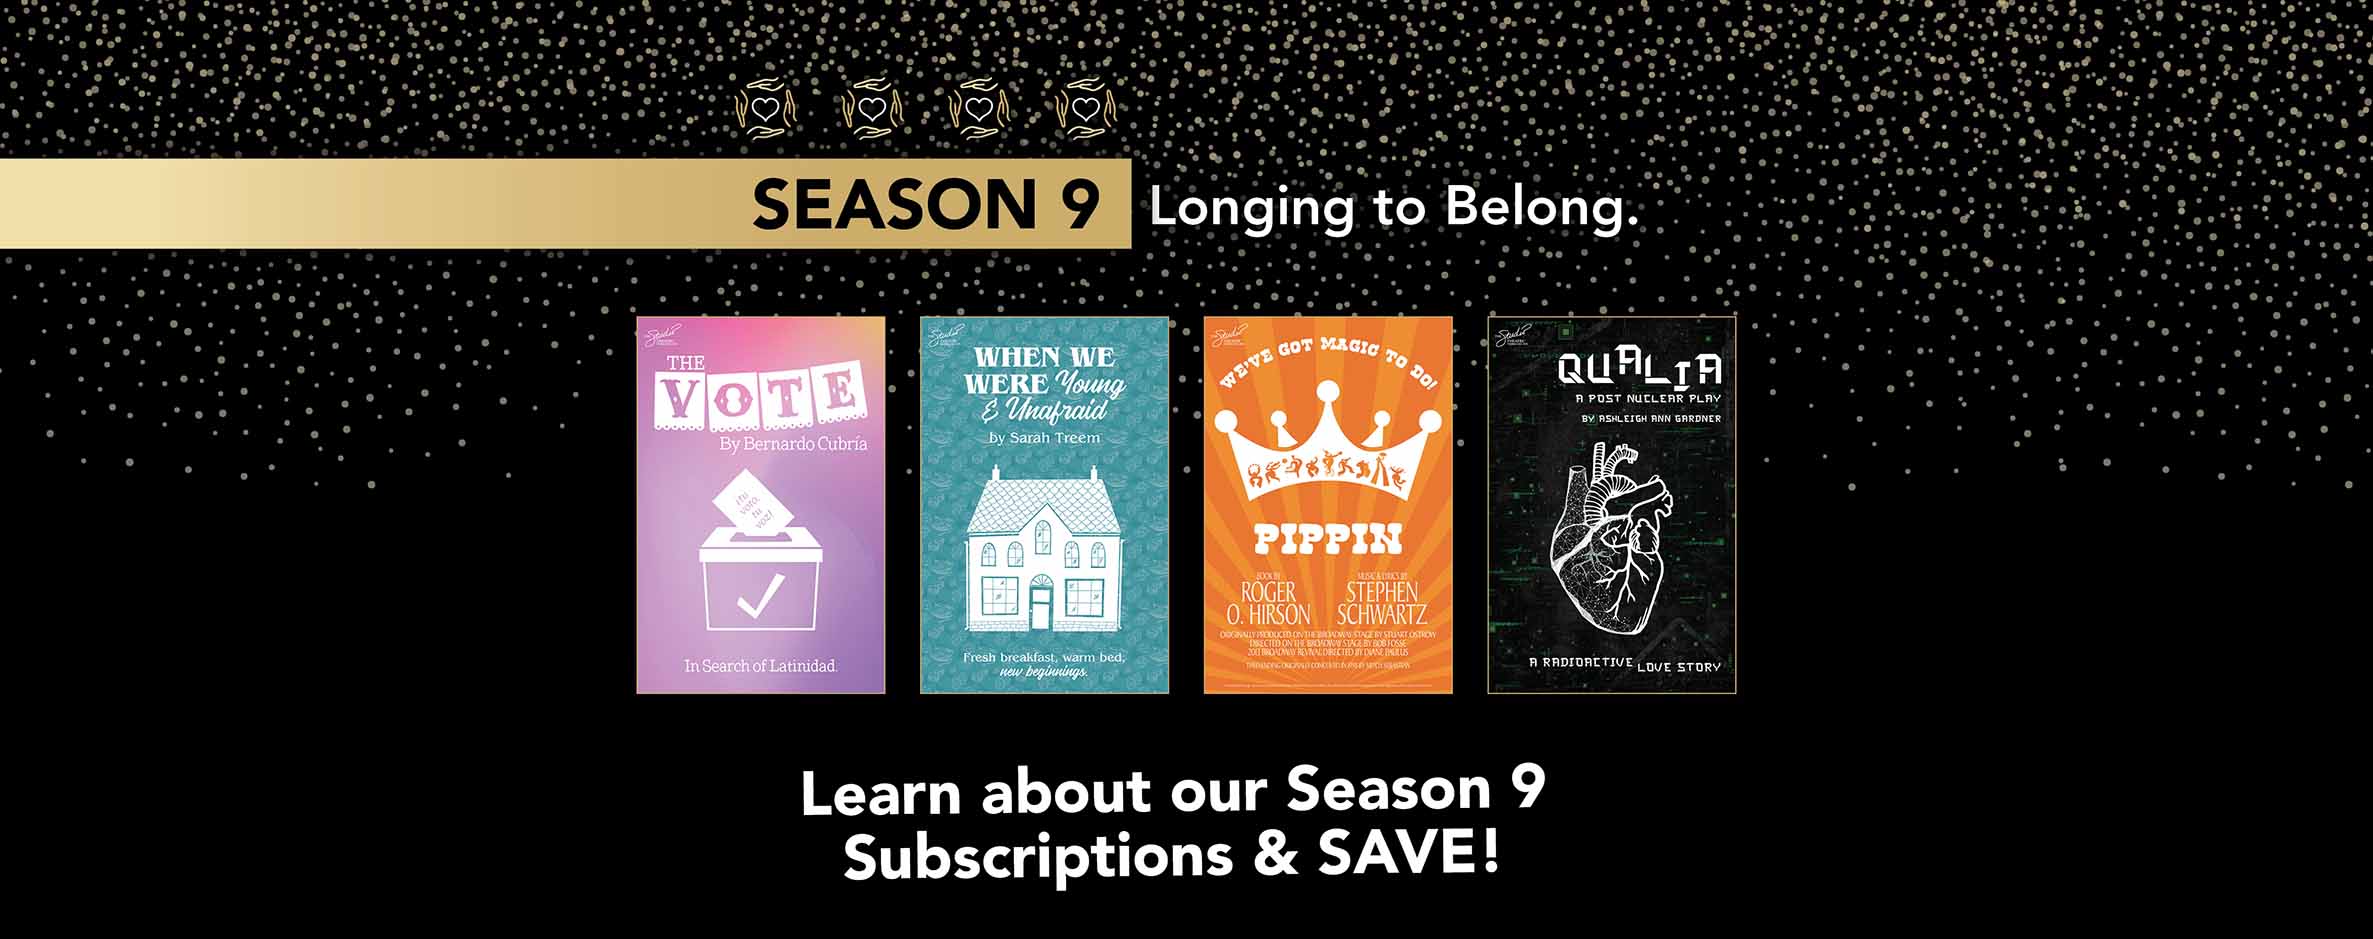 Season 9: Longing to Below. Learn about our Season 9 Subscription and SAVE!